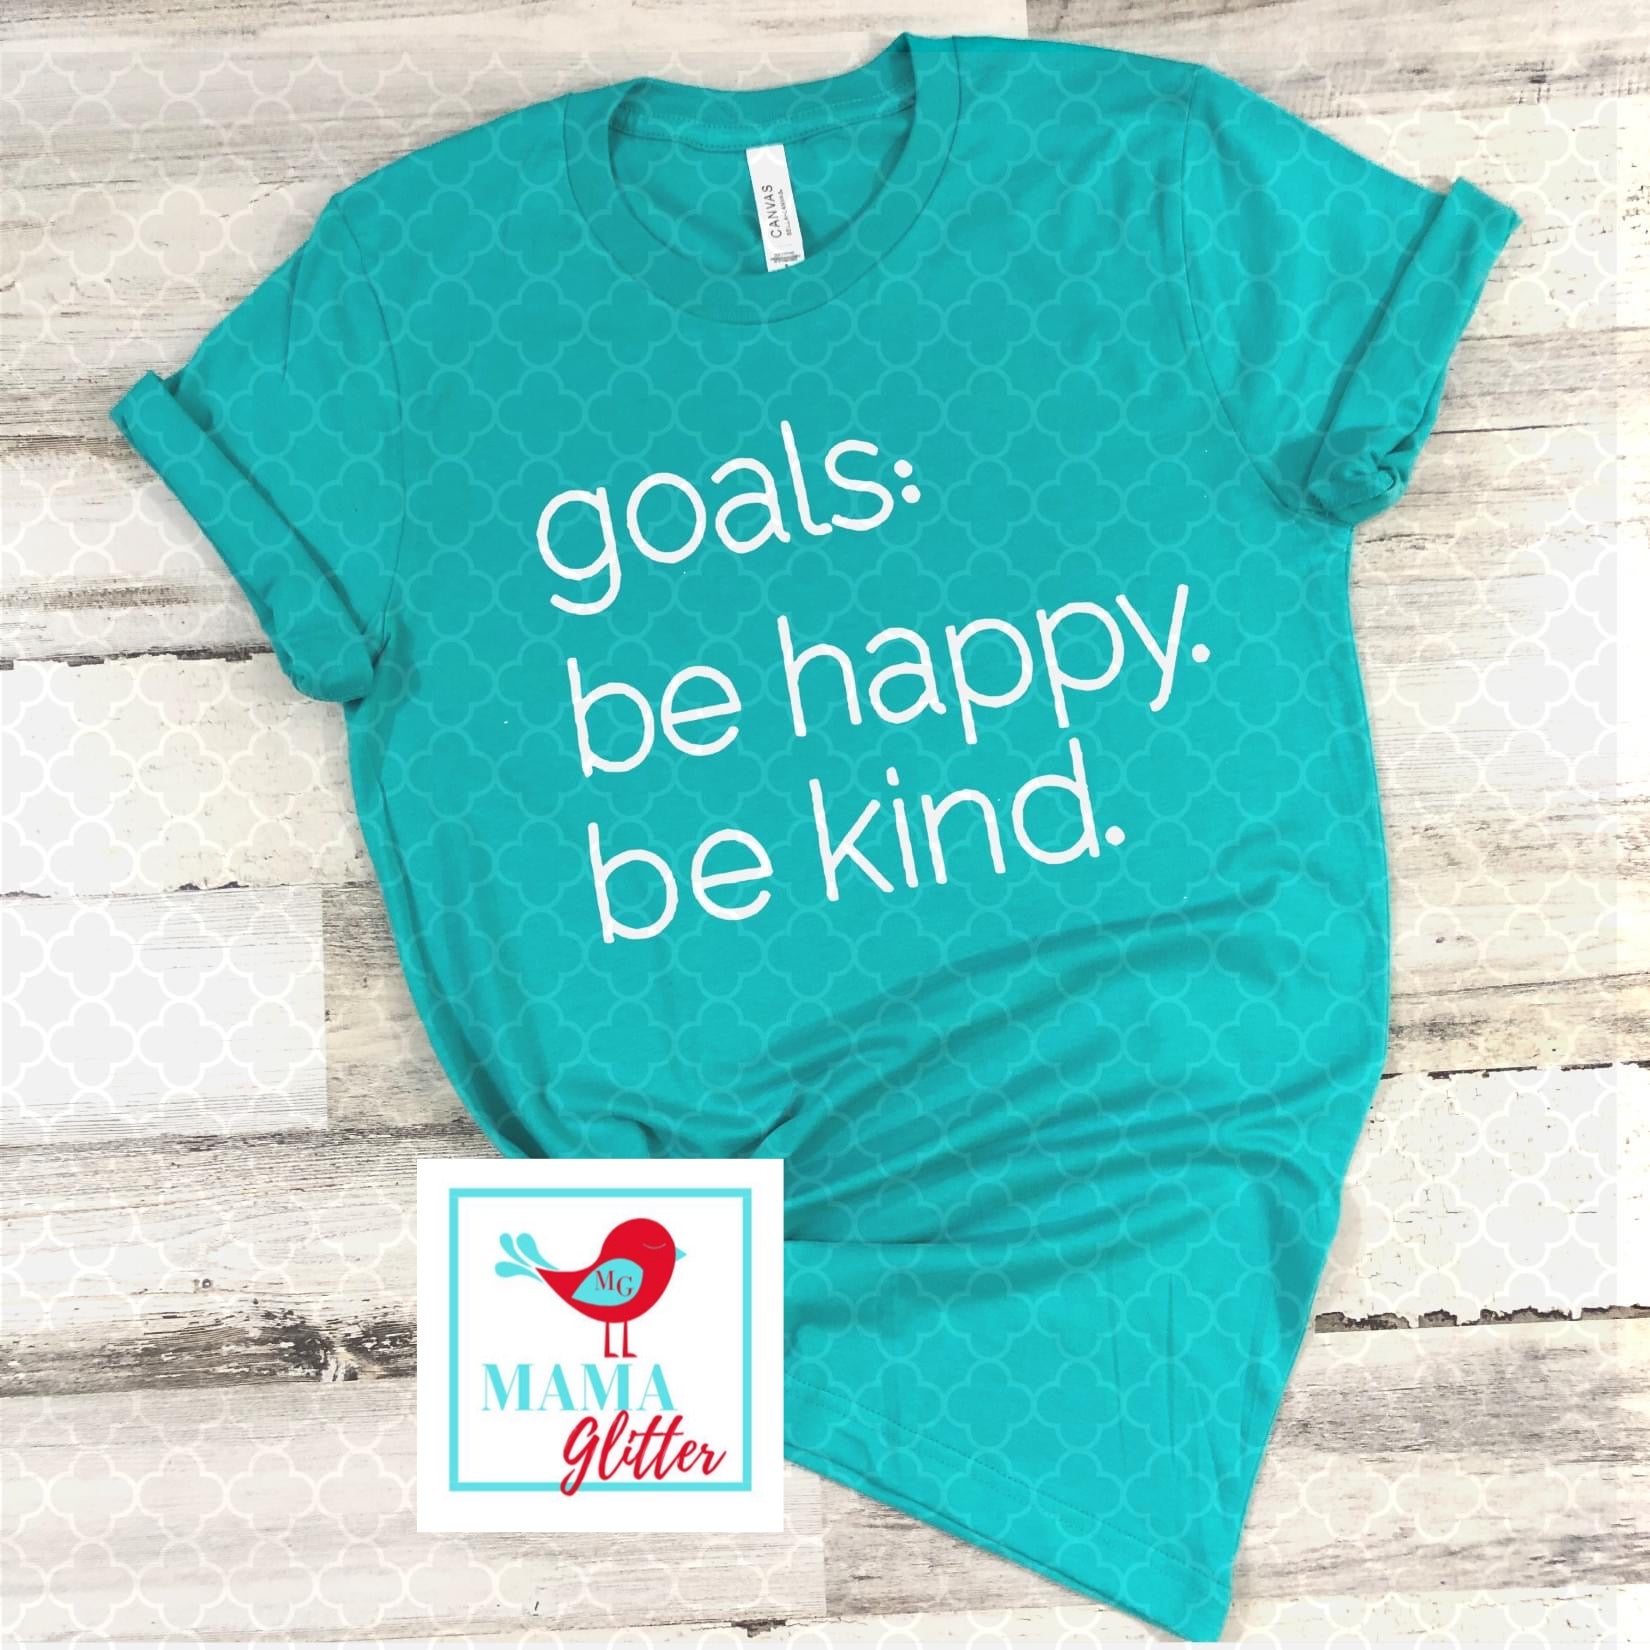 Goals: Be happy. Be kind.